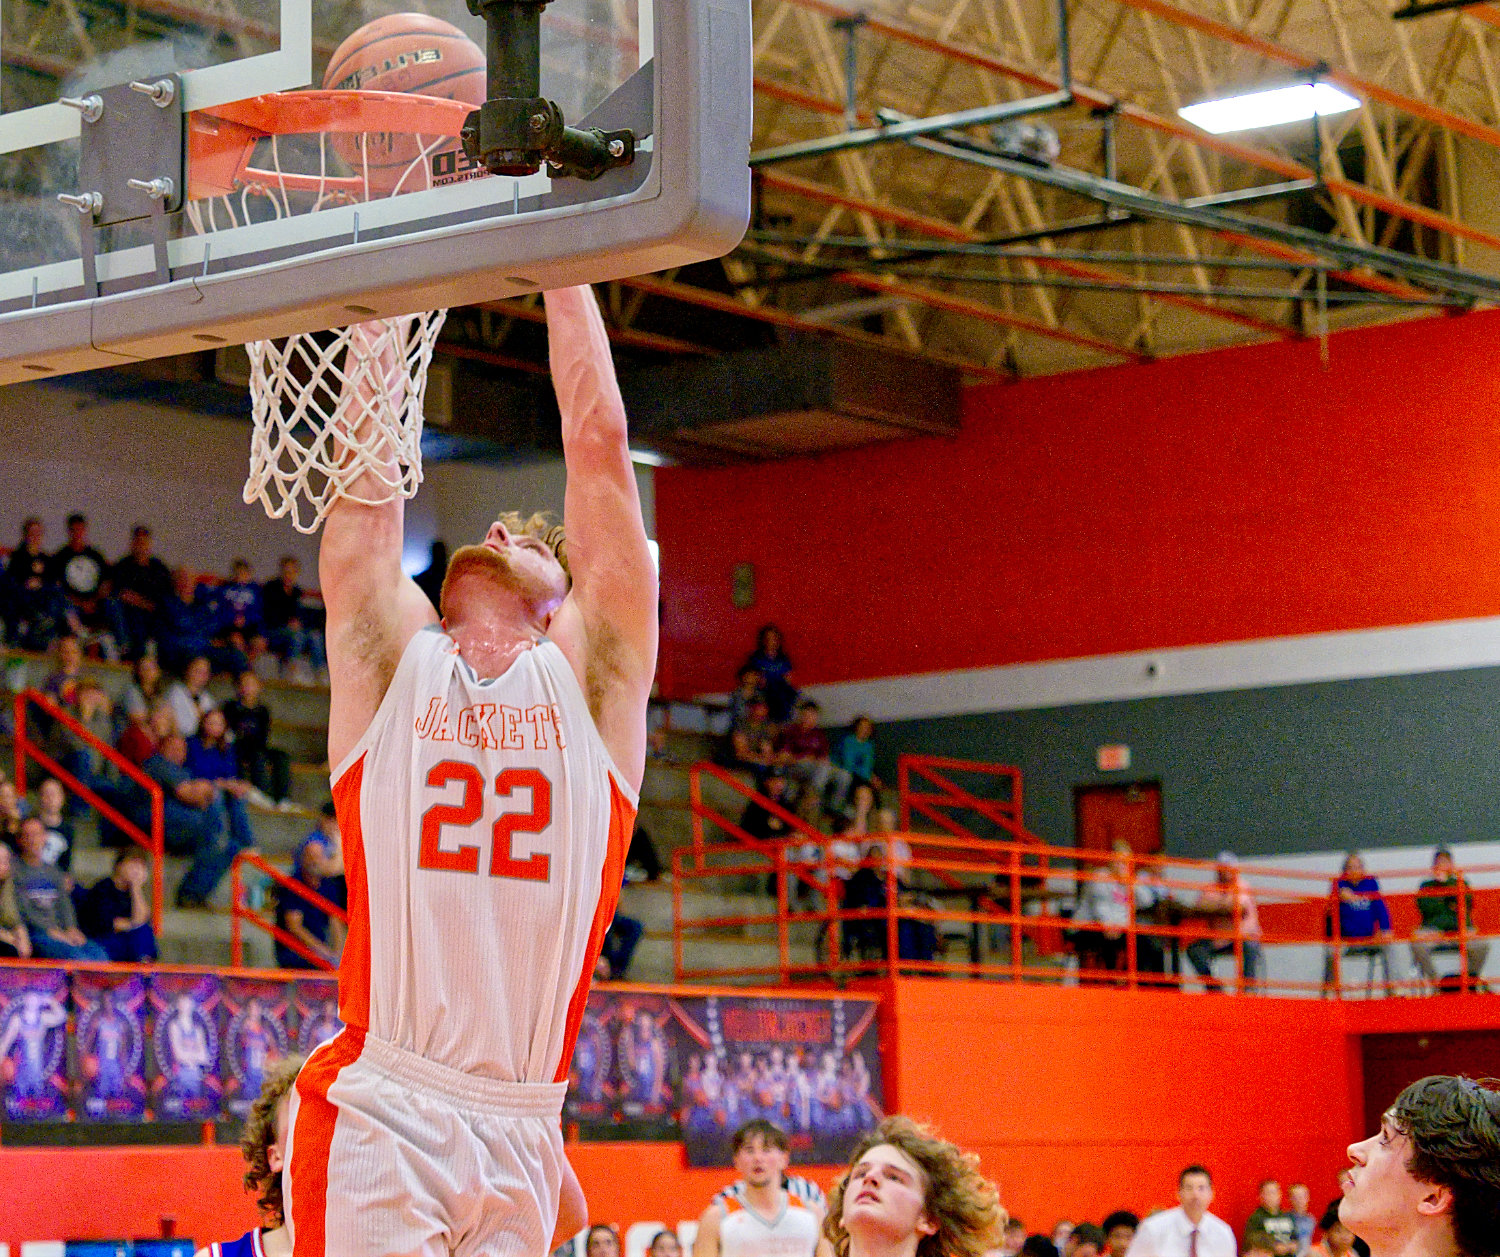 Dawson Pendergrass found his way to the rim multiple times, putting explanation points on the Mineola win. [see more shots, buy basketball photos]